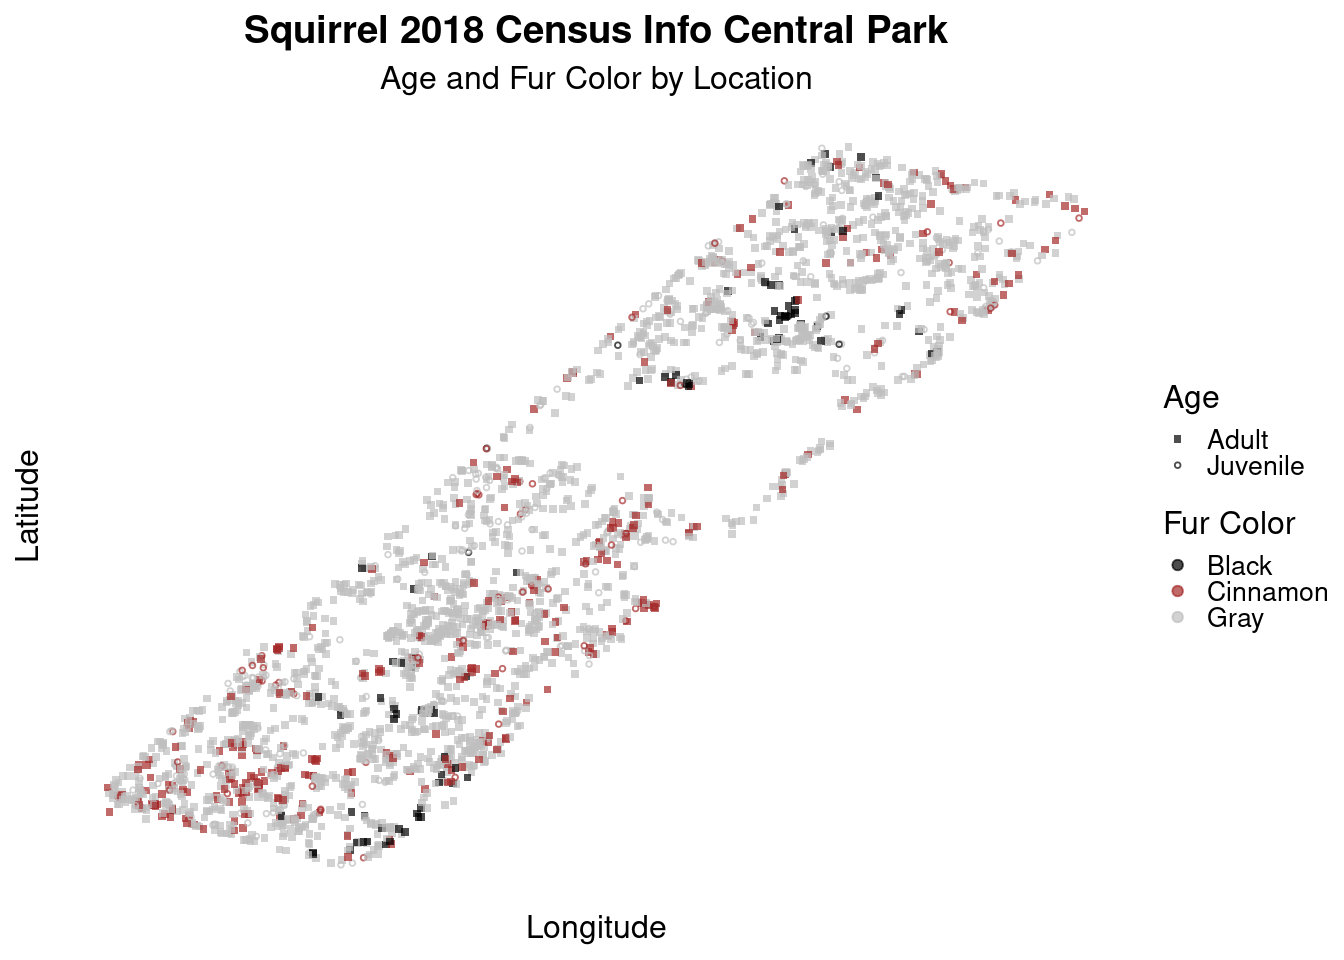 The map, Squirrel 2018 Census Info Central Park, displays where squirrels are located within central park, with the x axis being latitude and the y axis being longitude. The points are colored according to fur color (black, cinnamon, & gray) and sized according to age (adult and juvenile). The visualization shows that squirrels are distributed somewhat evenly throughout central park regardless of fur color or age, although there seems to be some clusters of squirrels  that group together according to their color. There are significantly more gray squirrel sightings than black or cinnamon.